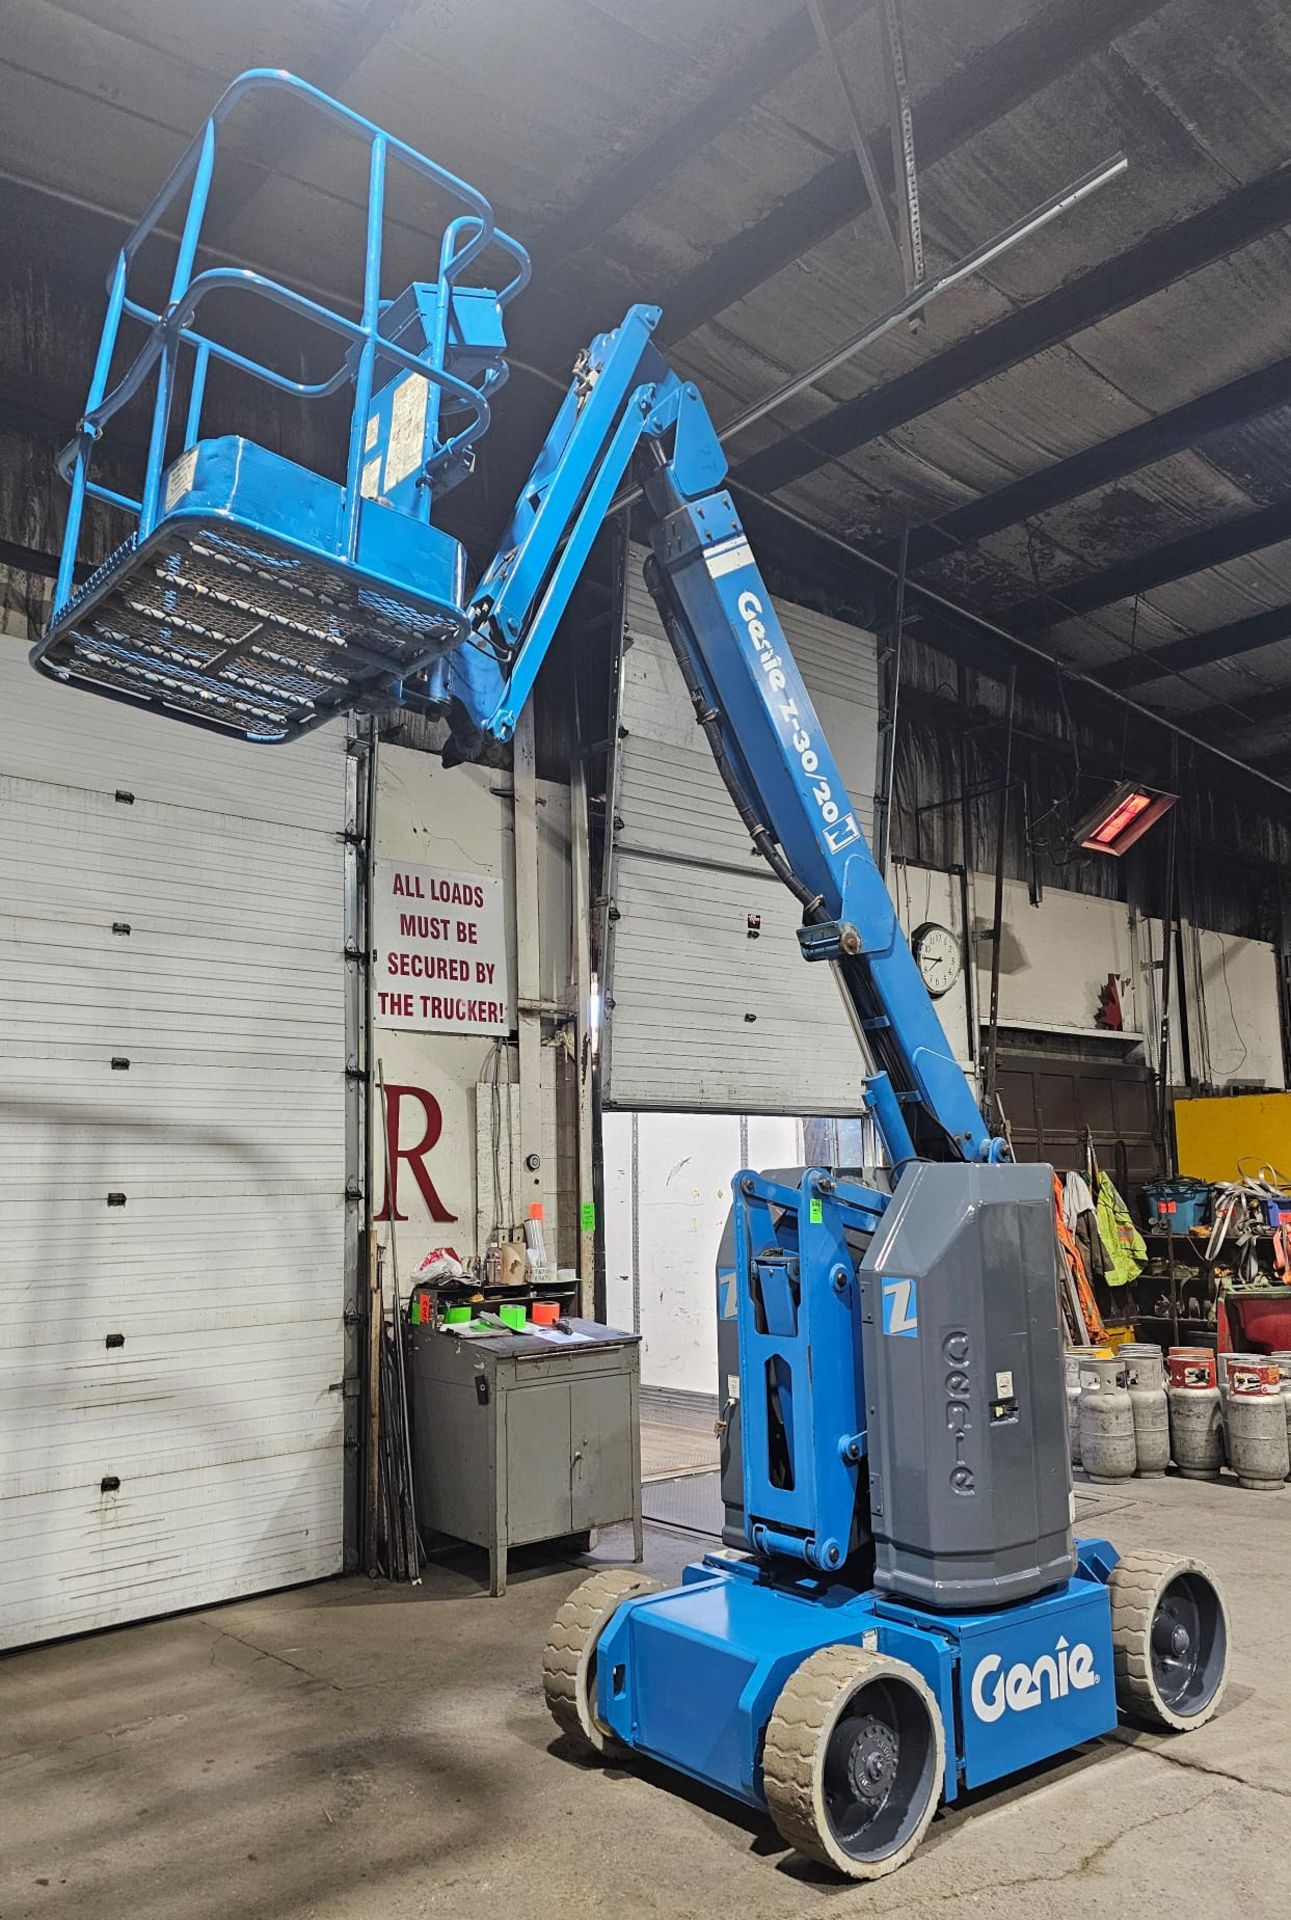 Genie model Z-30-N Zoom Boom Electric Motorized Man Lift 30' Height & 21' Reach - with 24V Battery - Image 6 of 10